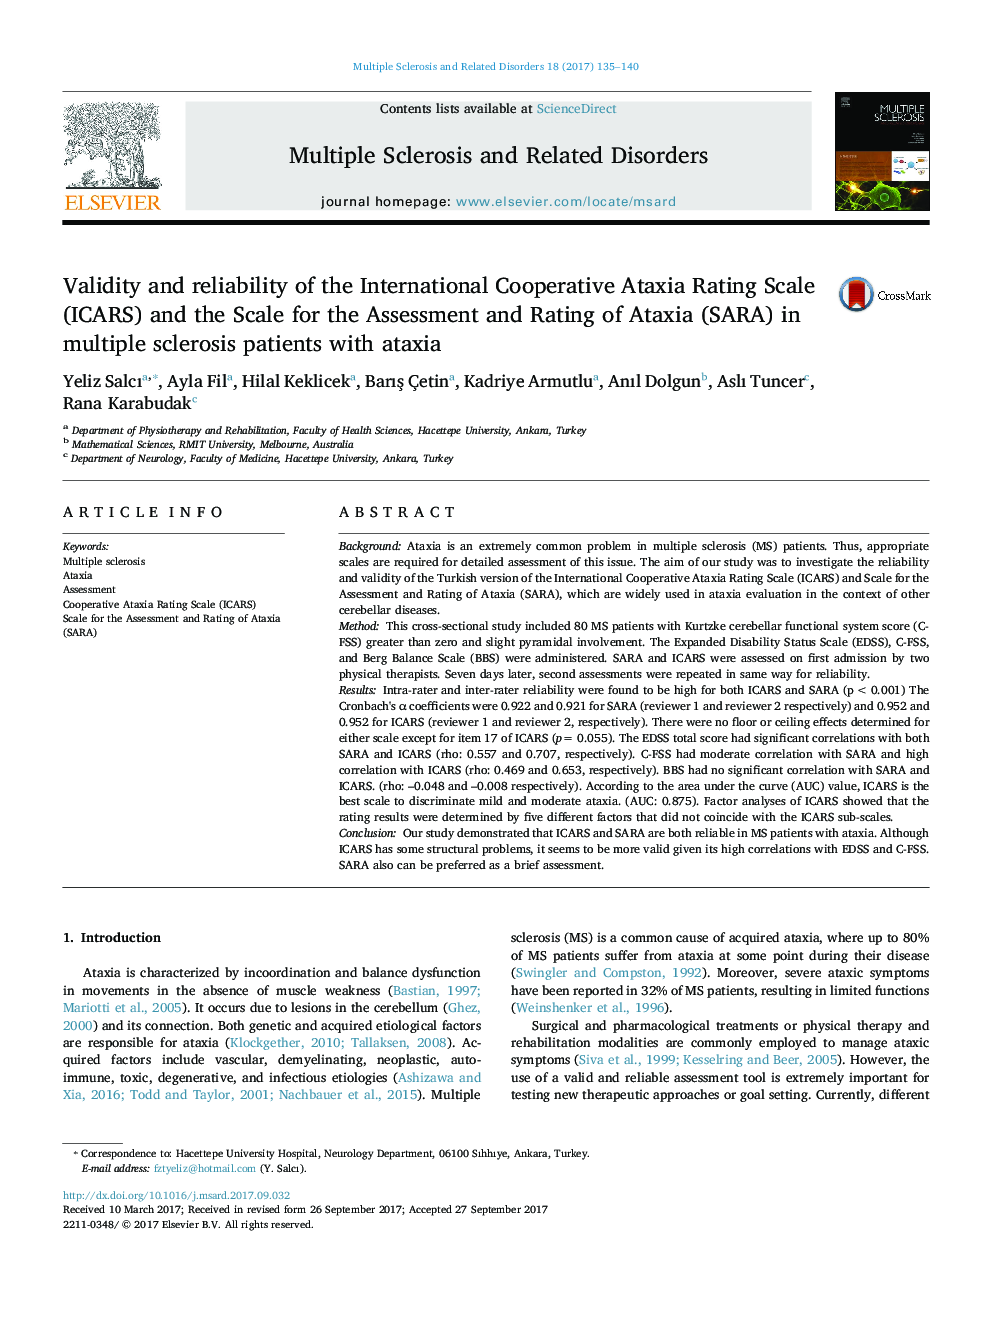 Validity and reliability of the International Cooperative Ataxia Rating Scale (ICARS) and the Scale for the Assessment and Rating of Ataxia (SARA) in multiple sclerosis patients with ataxia